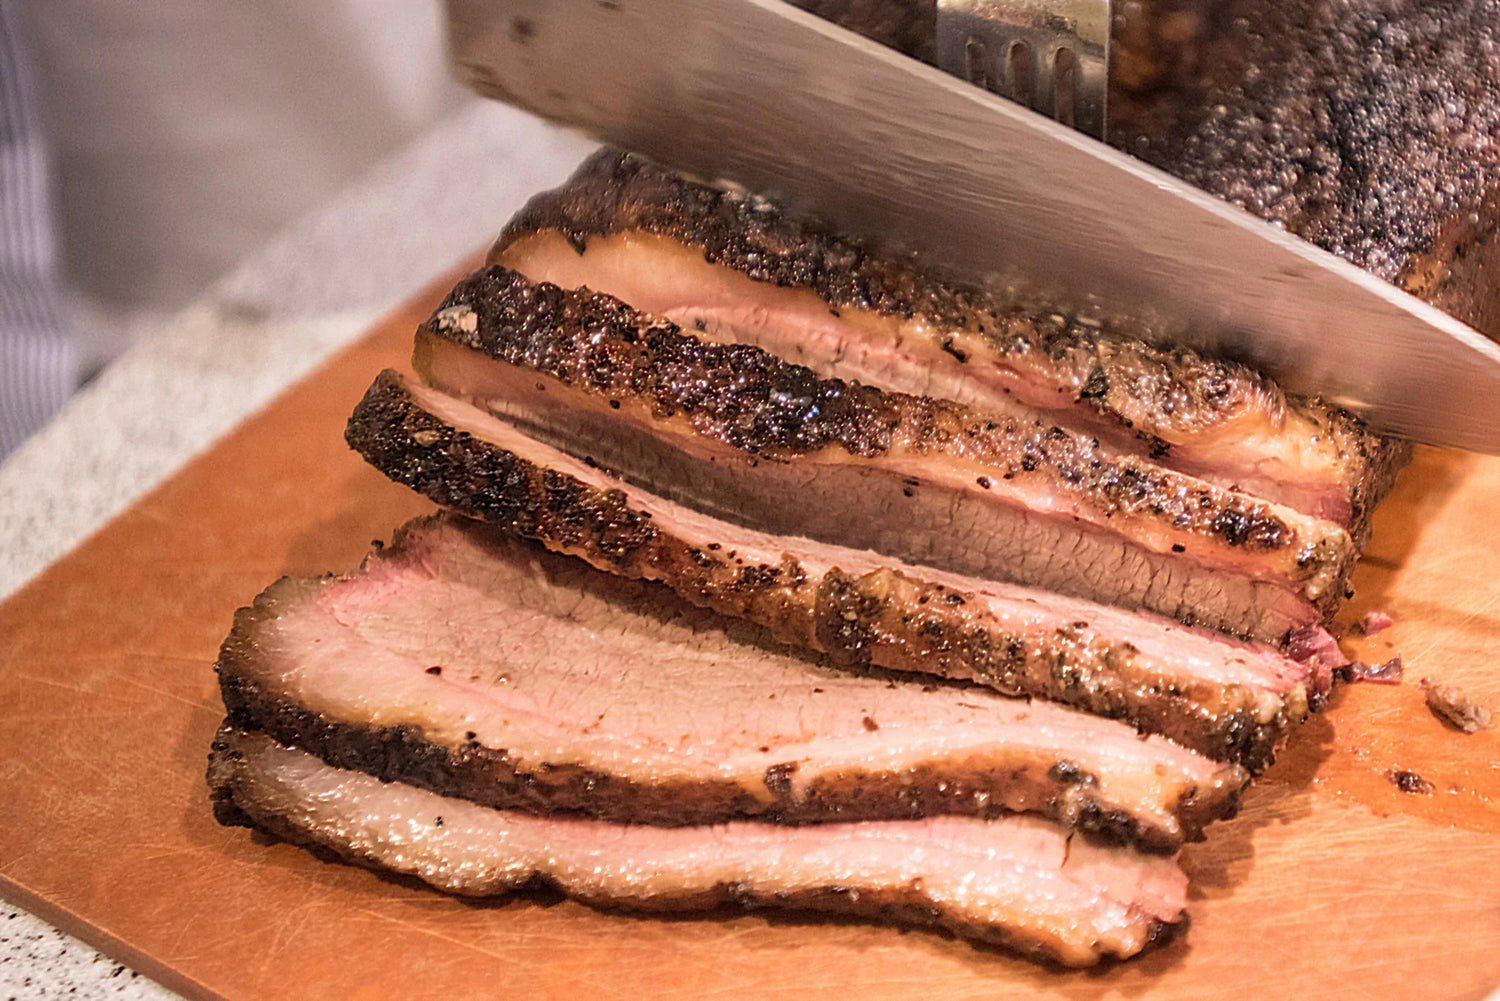 How to Slice a Brisket